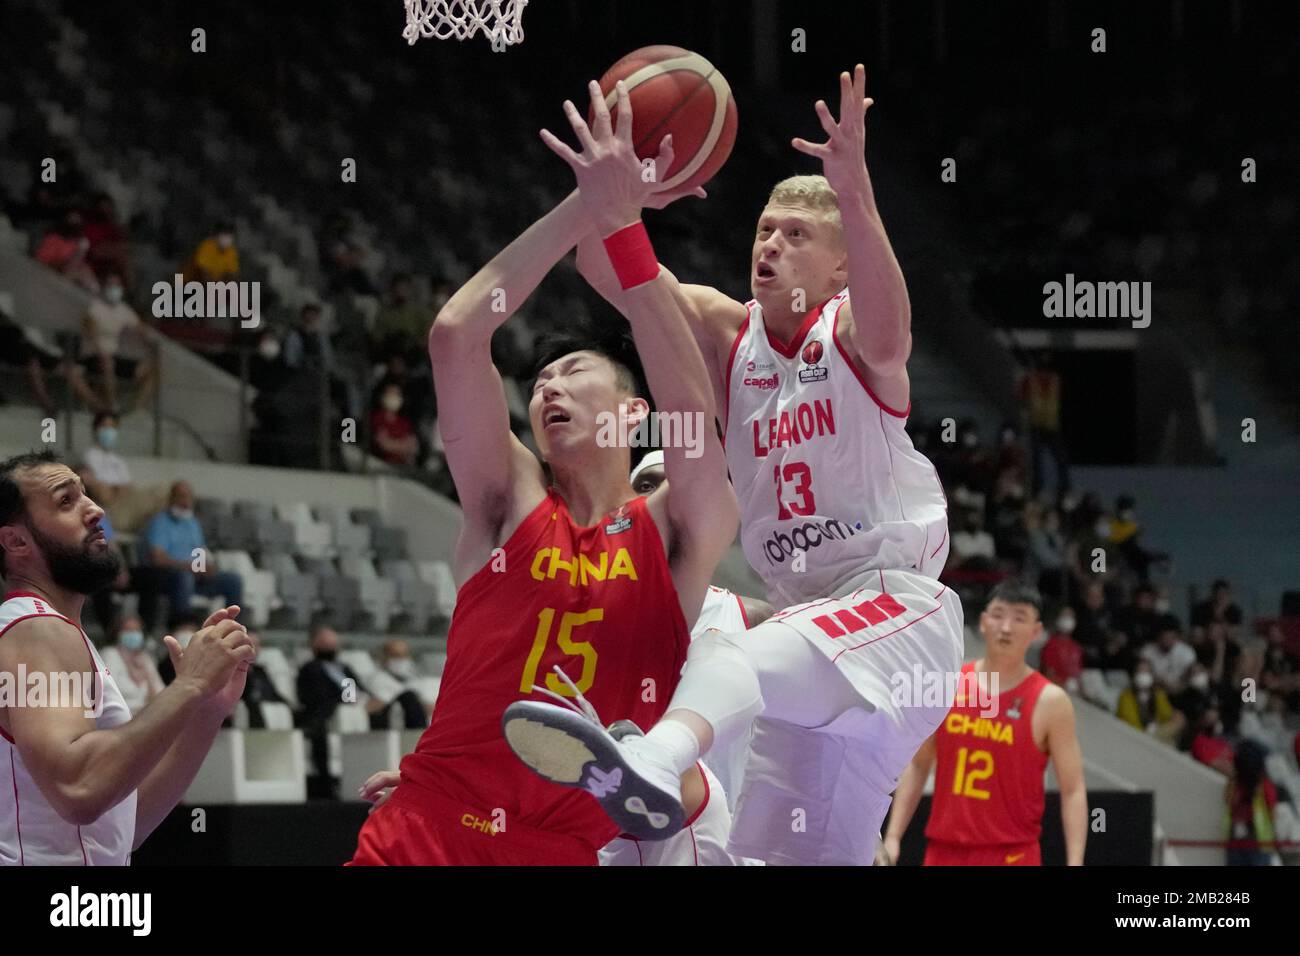 China's Zhou Qi, left, battles for a rebound against Lebanon's Yousef  Khayat during their quarter final match at FIBA Asia Cup 2022 basketball  tournament in Jakarta, Indonesia, Wednesday, July 20, 2022. (AP